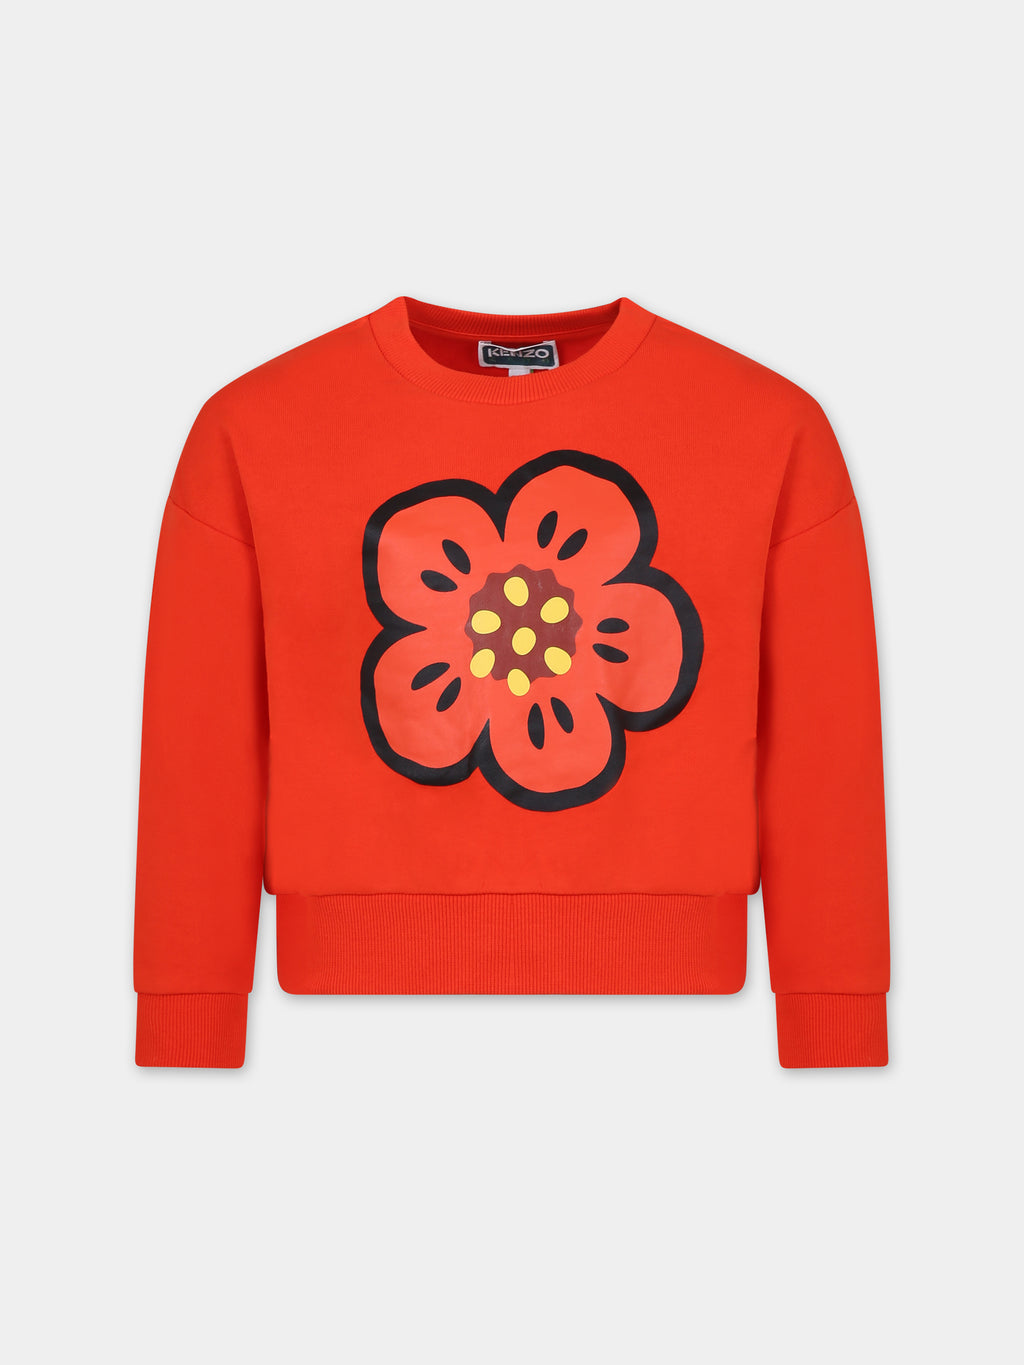 Red sweatshirt for girl with flower